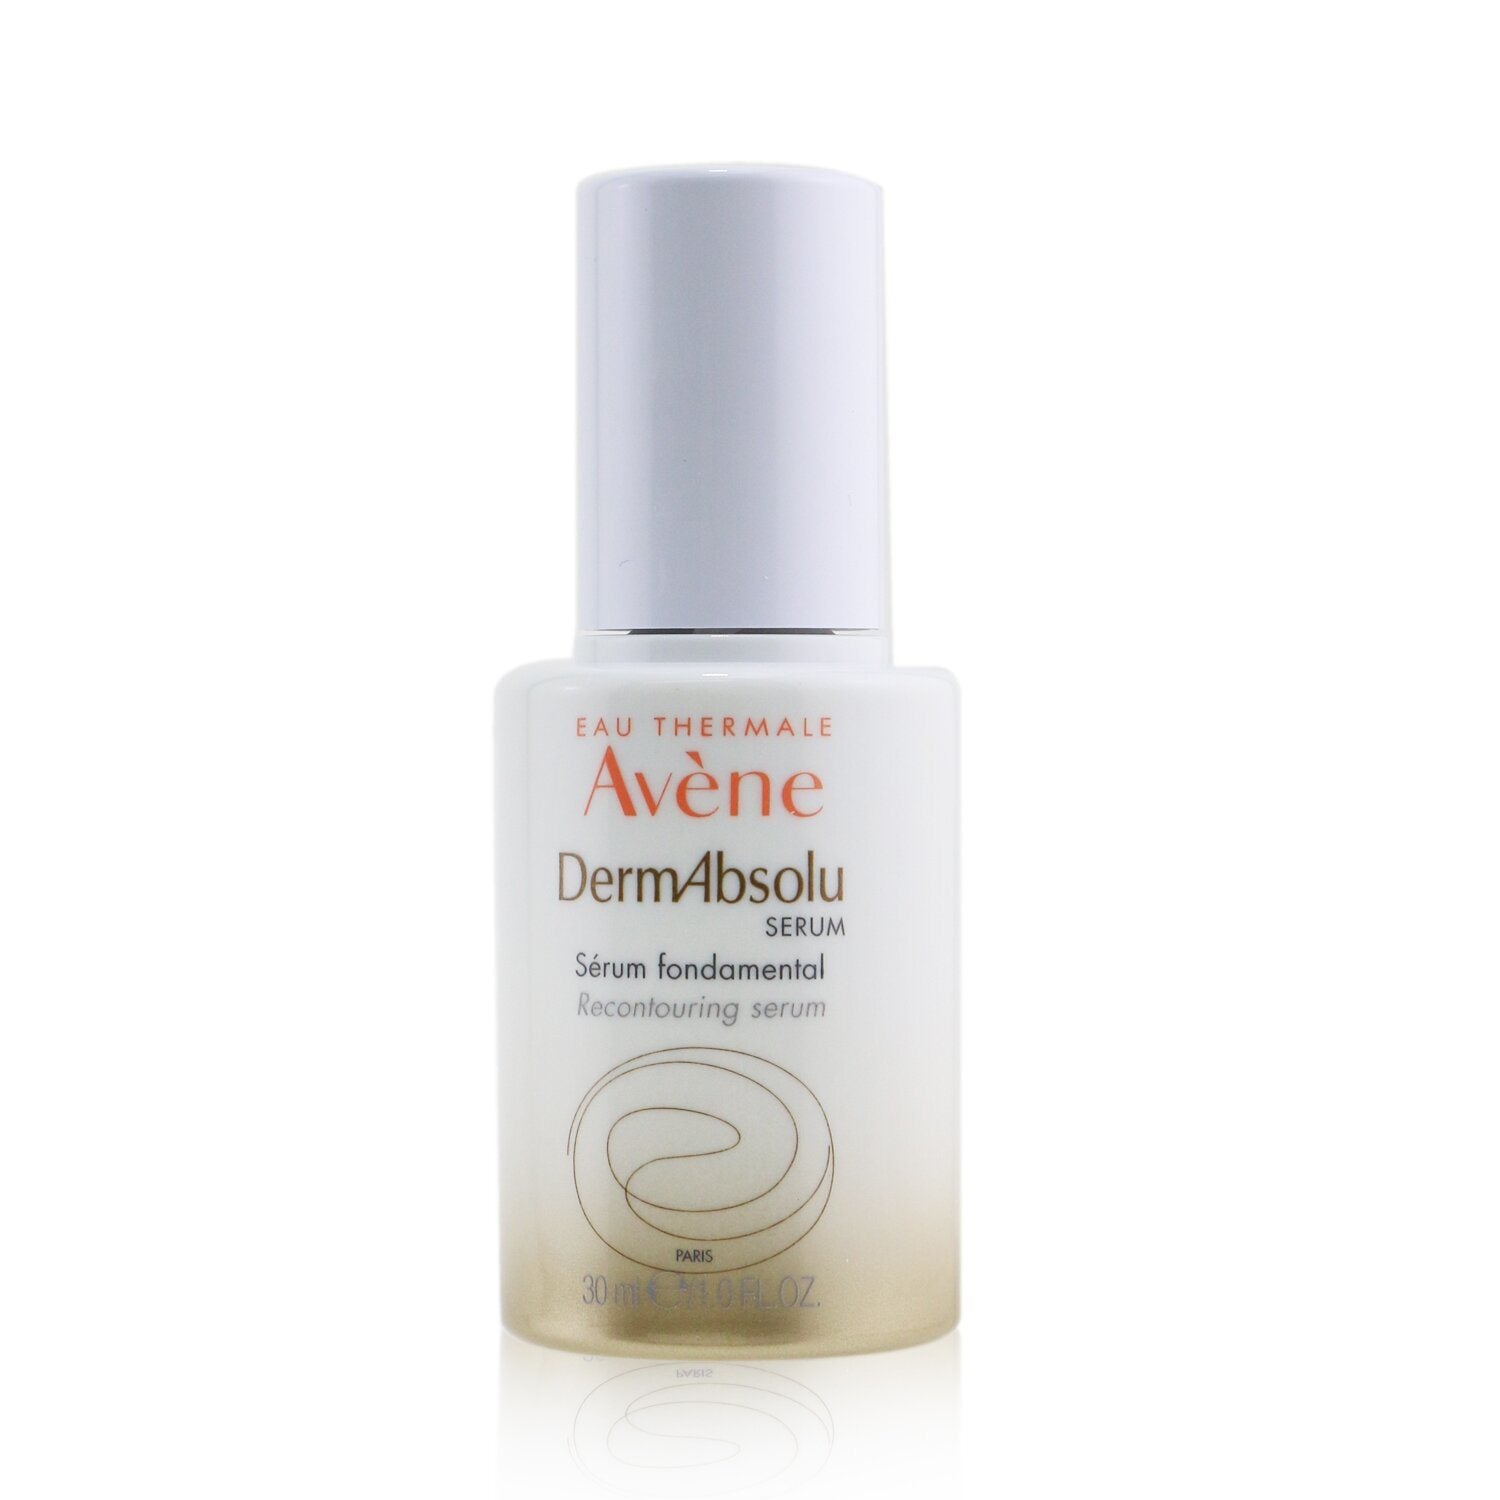 A bottle of Avène DermAbsolu SERUM Recontouring Serum, enriched with Vanilla Polyphenols, on a white background.